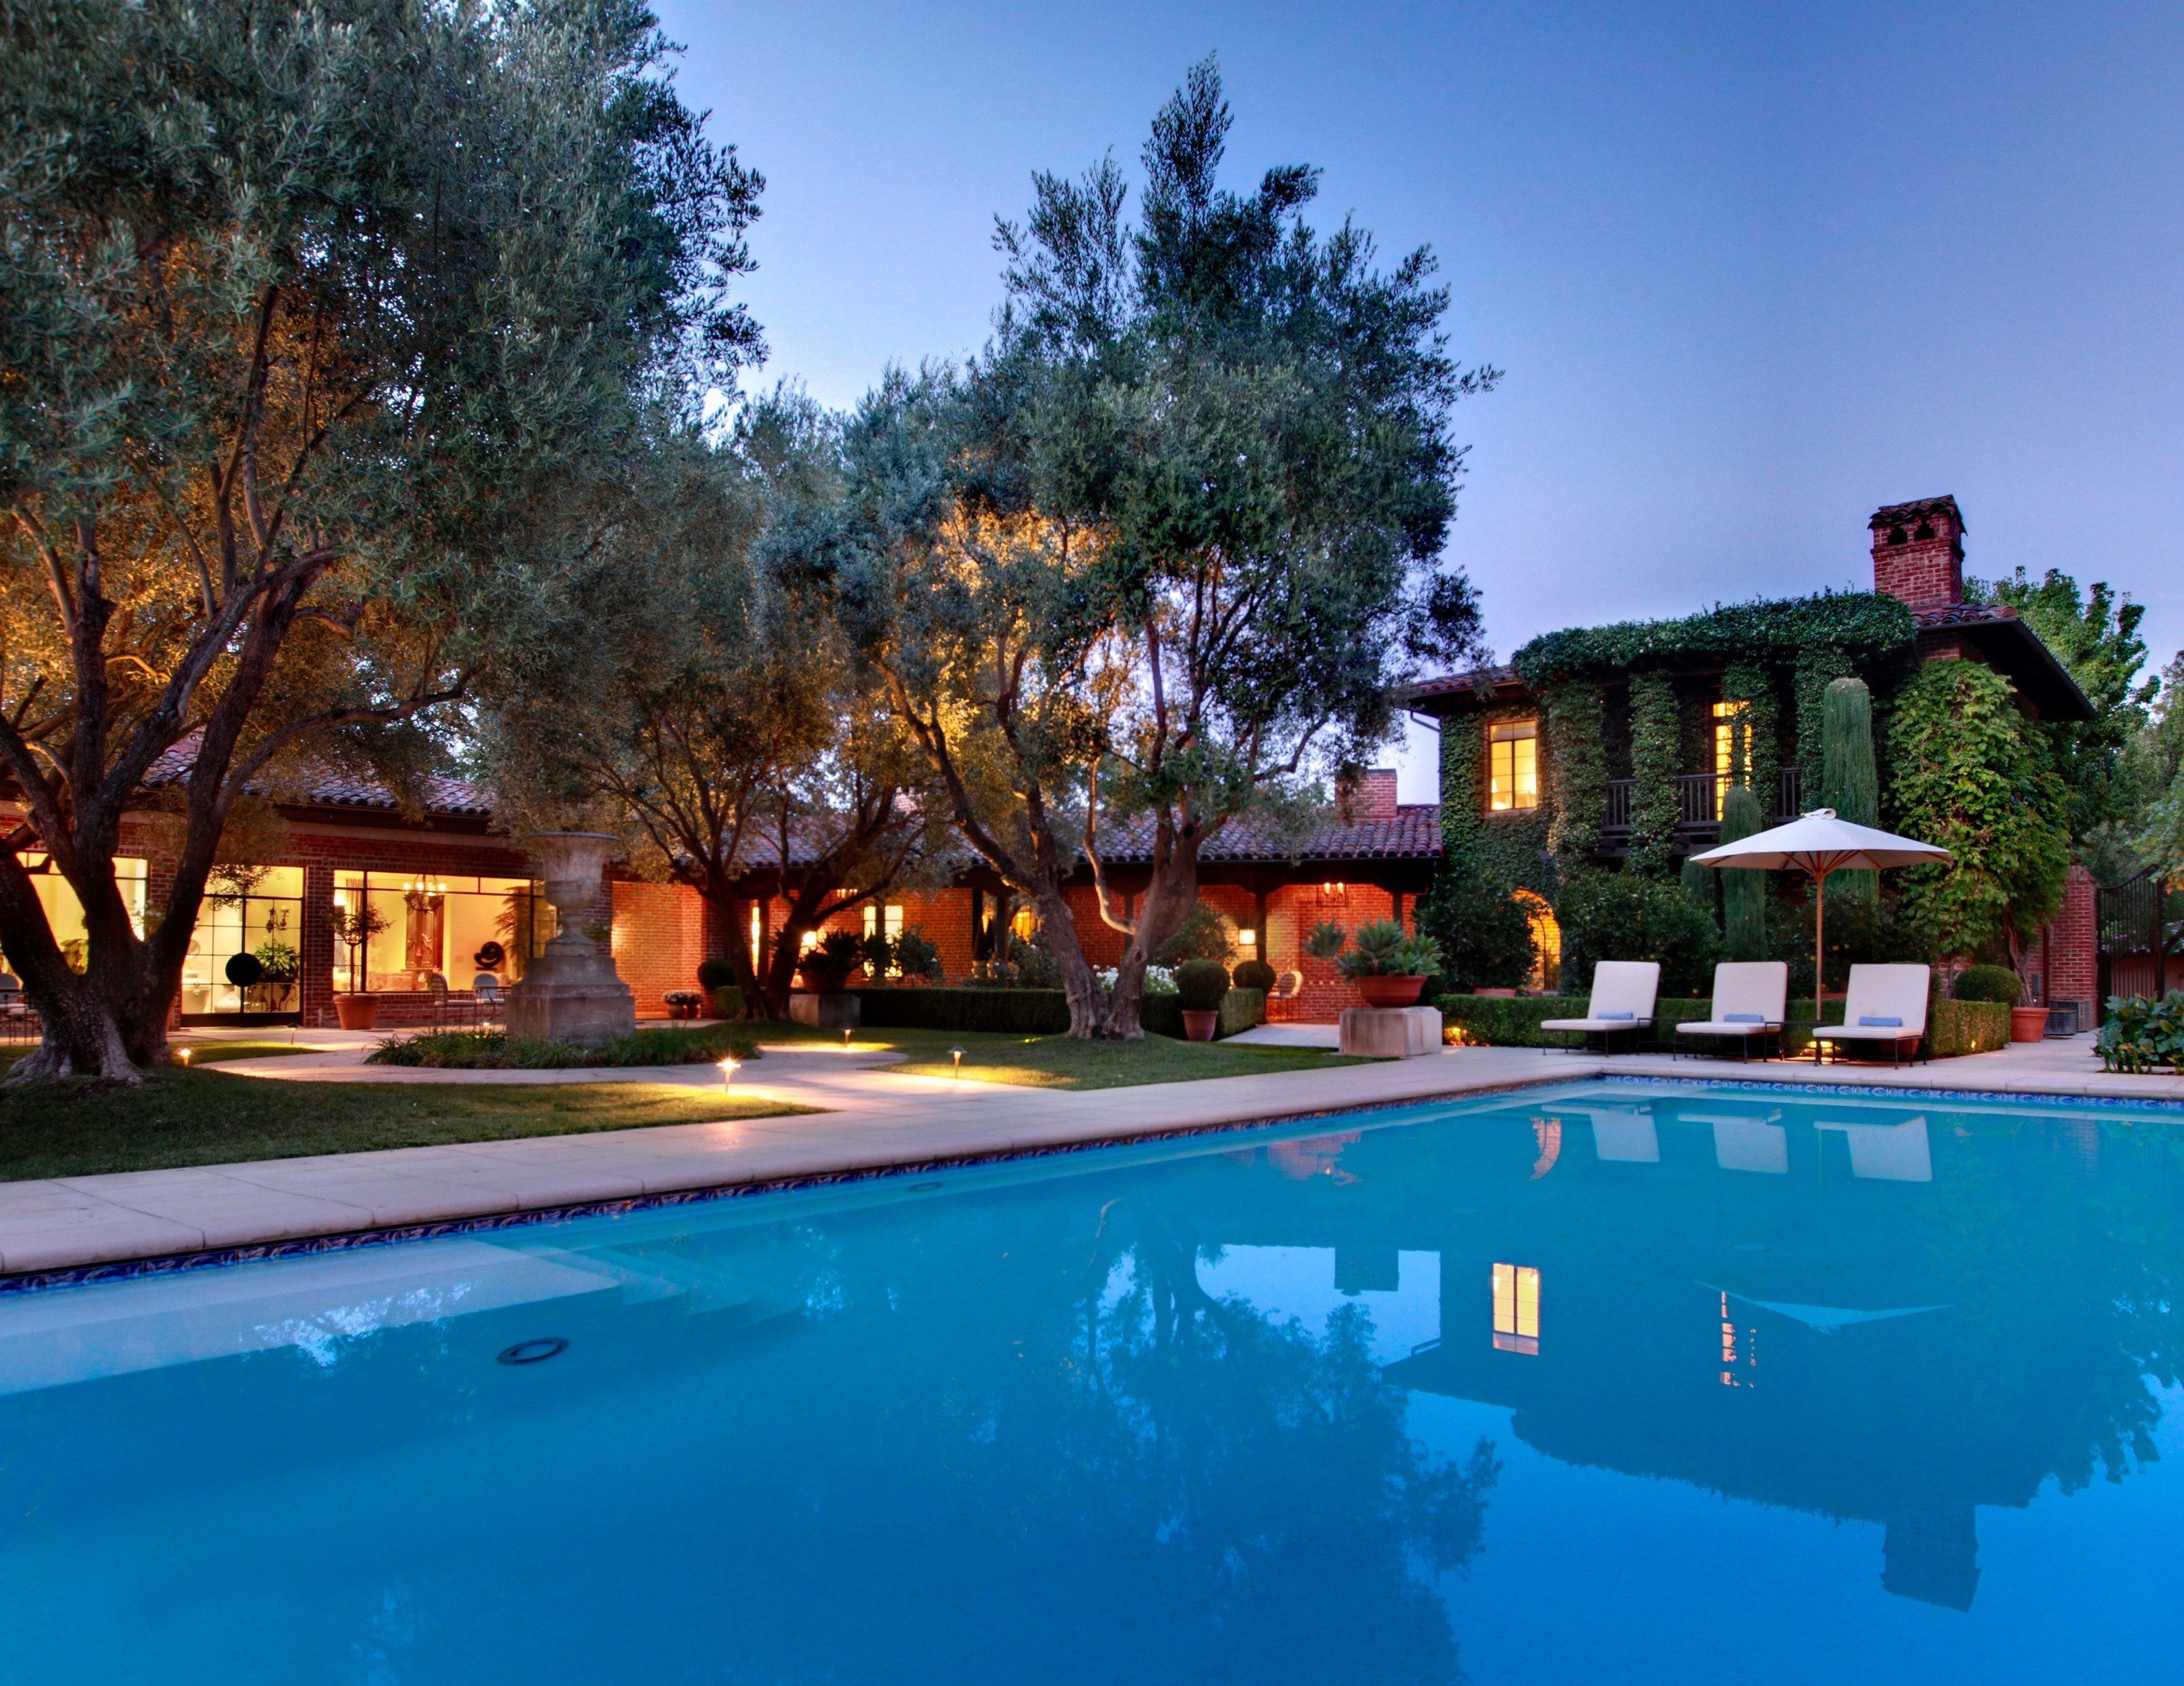 The 32-room Spanish-Mediterranean estate sits on 20 acres in the heart of Napa Valley (PRNewsFoto/Concierge Auctions)